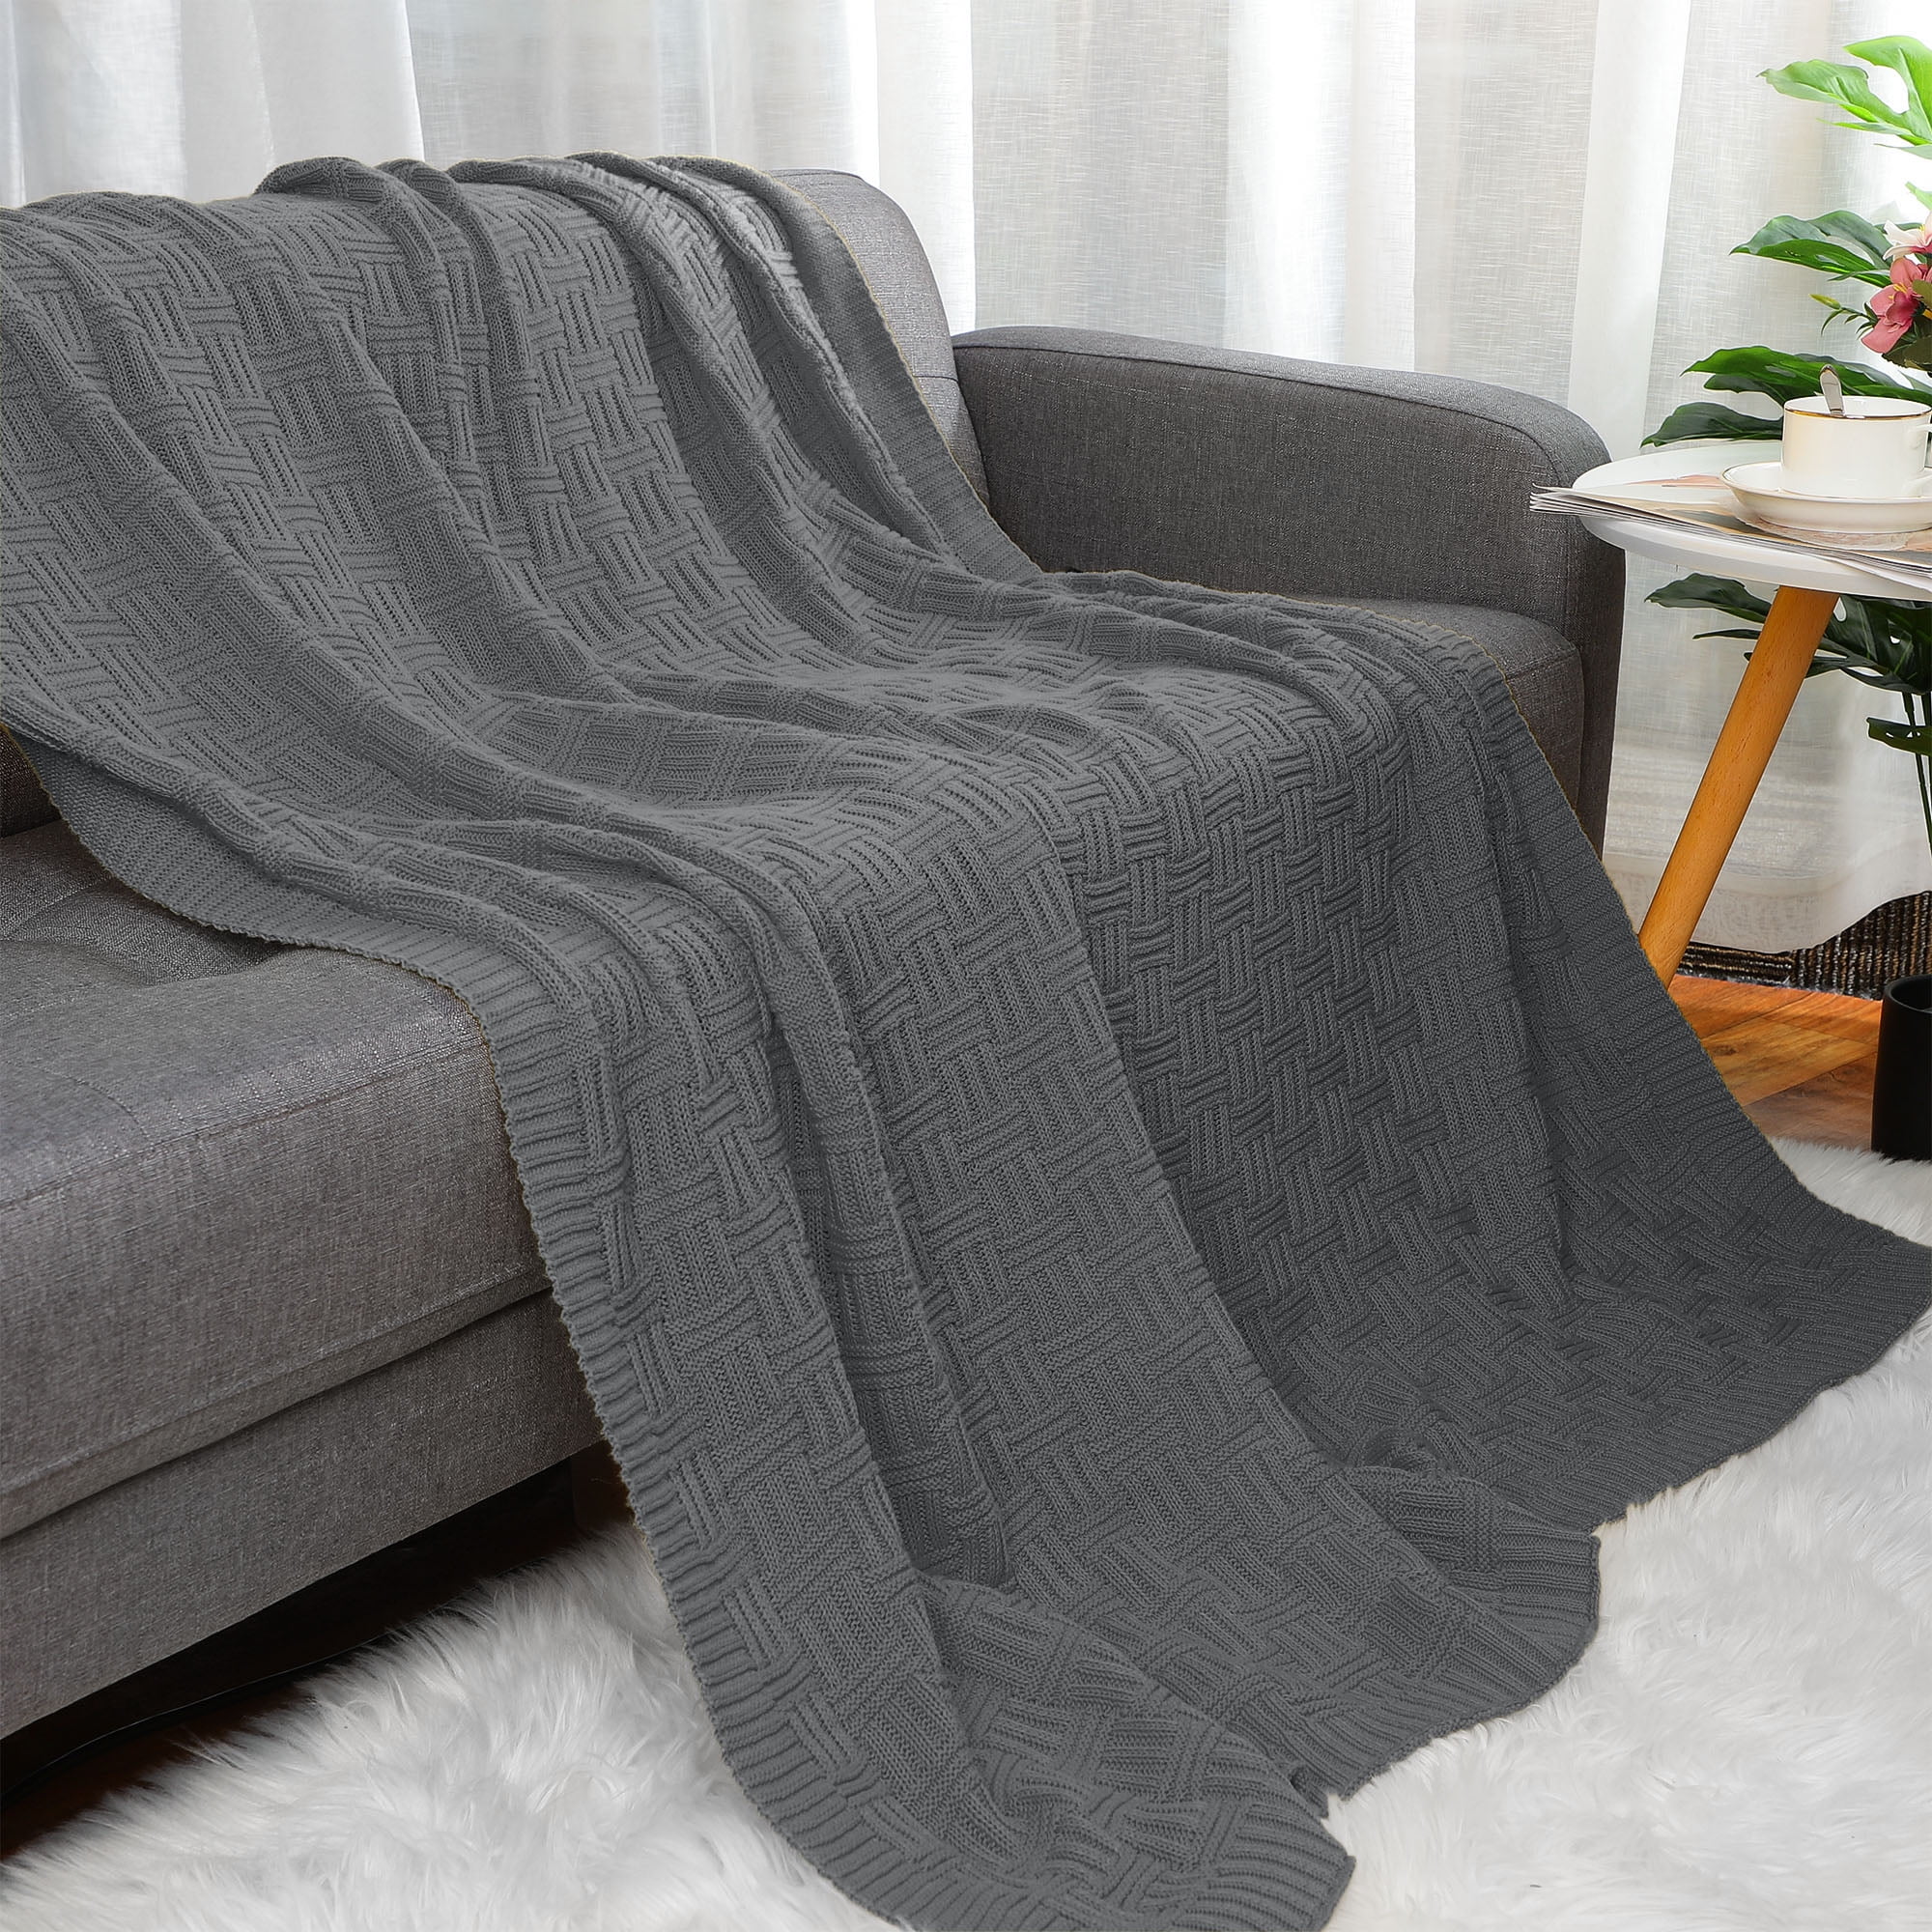 PiccoCasa 100% Cotton Cross Cable Knit Throw Blanket for Sofa Couch ...